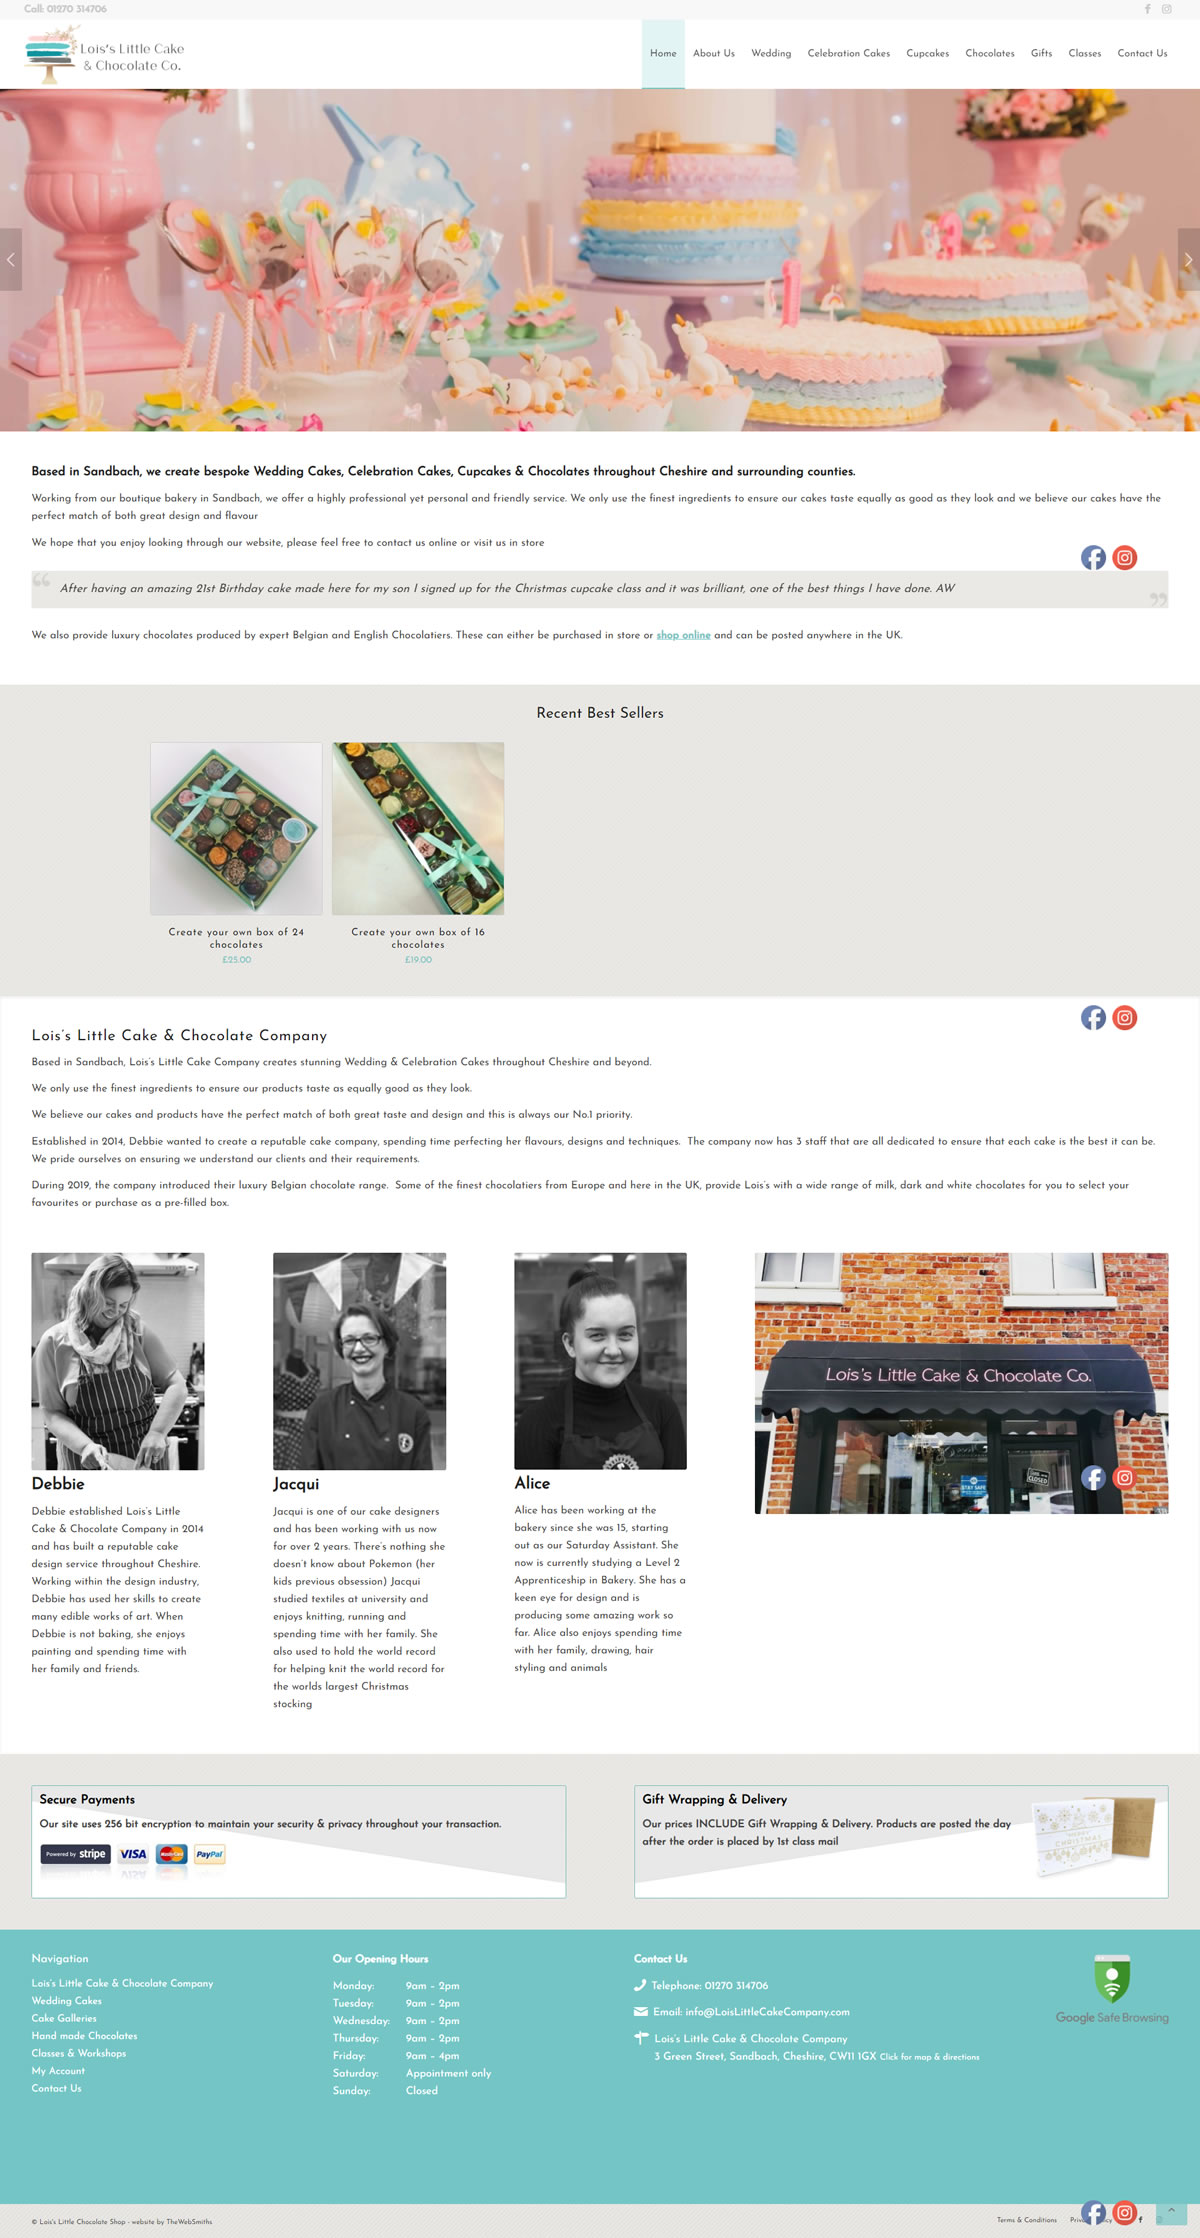 A new website for Lois's Little Cake & Chocolate Co.